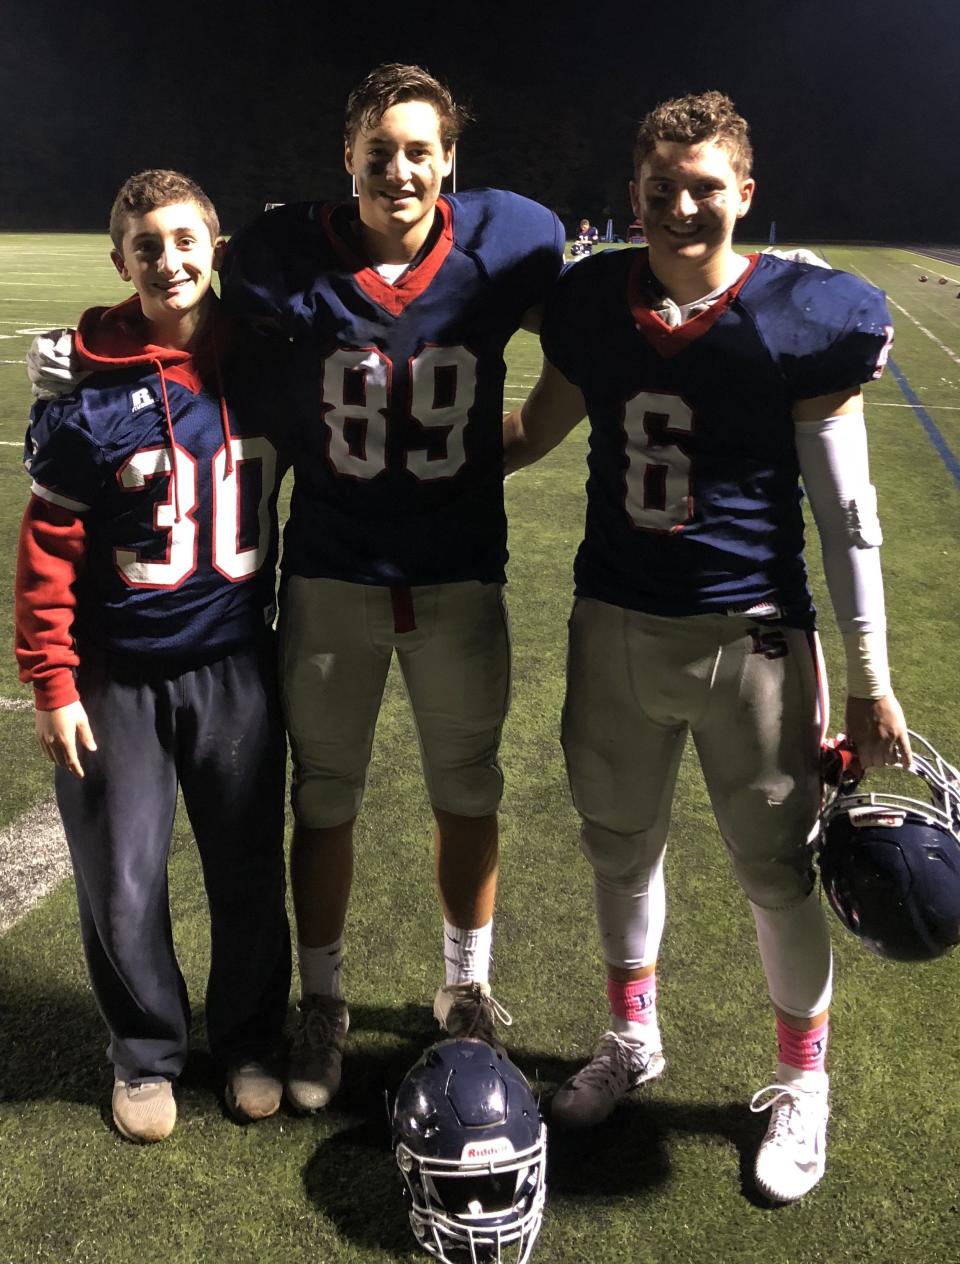 Brothers Luke Ohler, from left, Will Ohler and Ben Ohler have all served as captains for Lincoln'Sudbury.